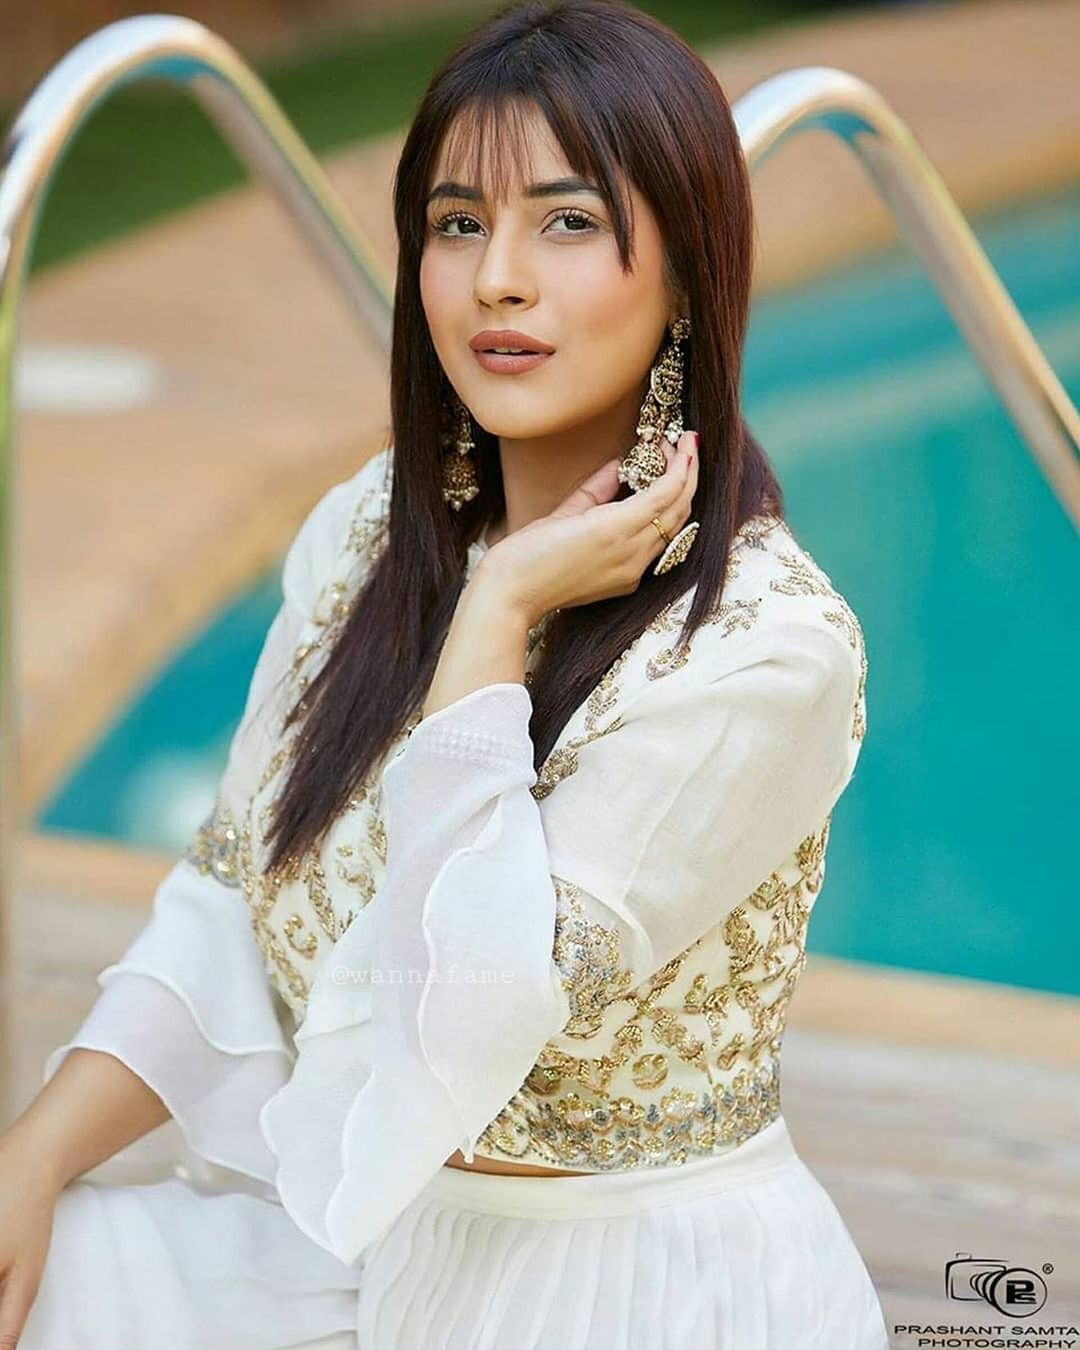 Shehnaaz Gill works her charm in the white and golden outfit. 